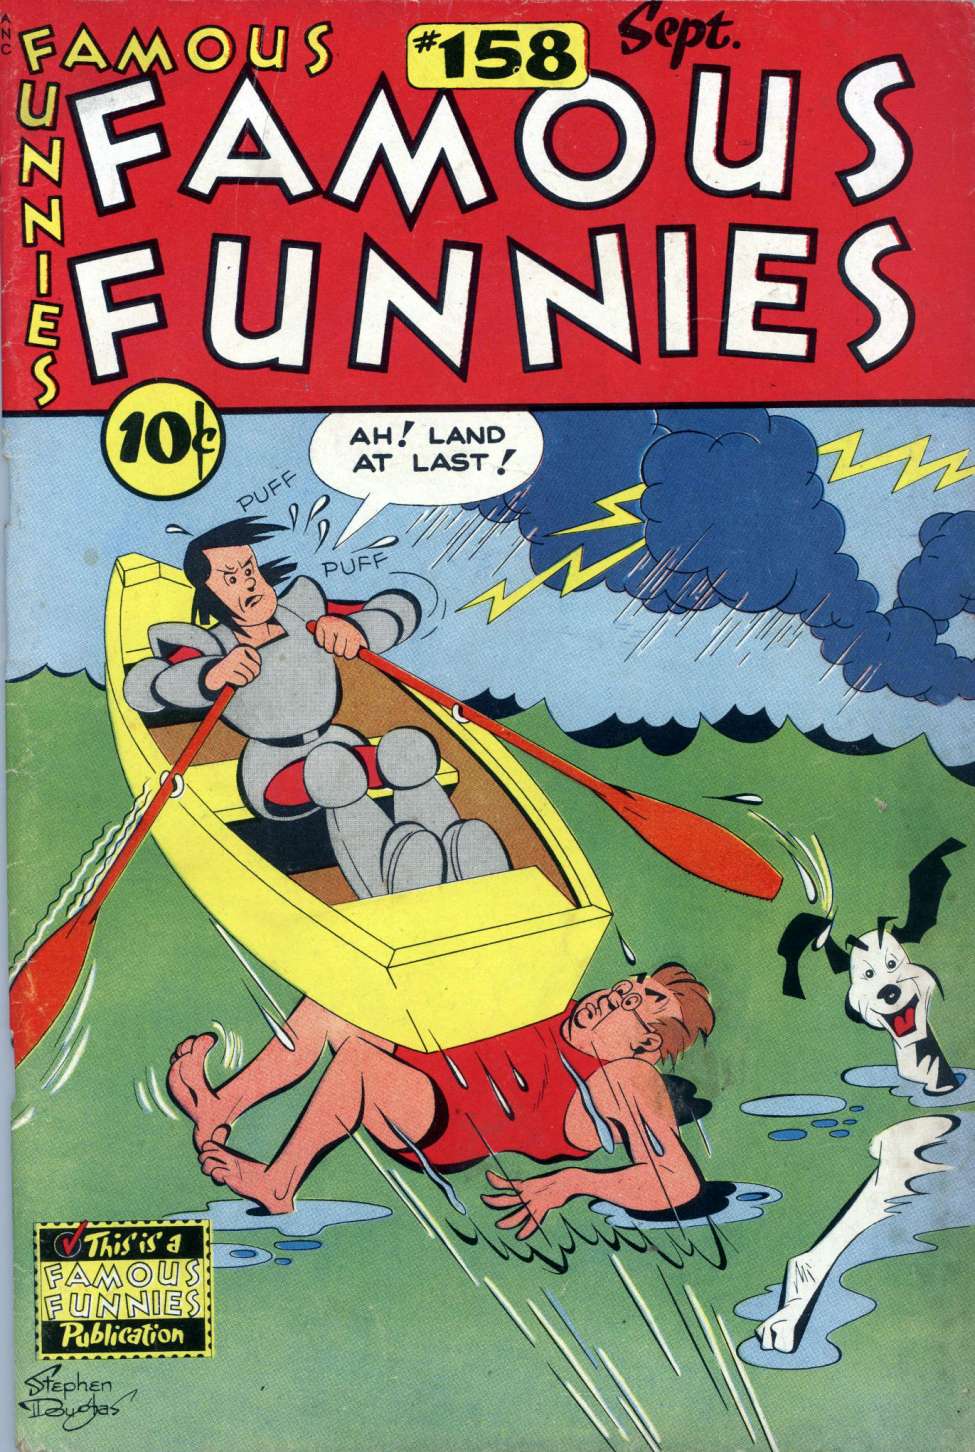 Book Cover For Famous Funnies 158 (alt) - Version 1